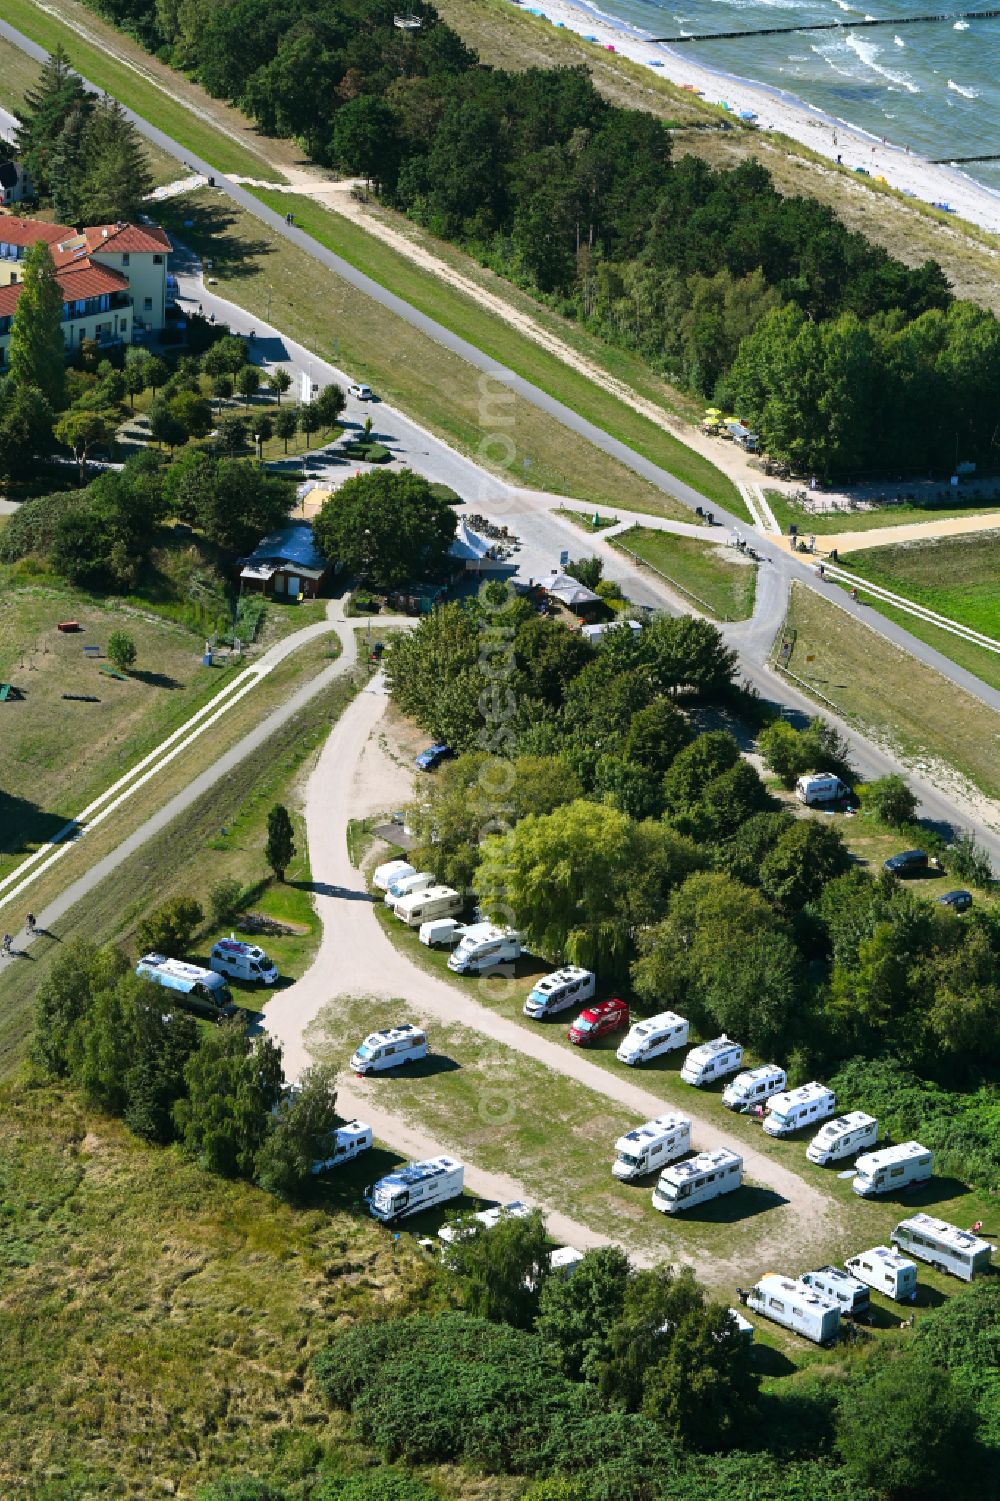 Zingst from above - Campsite with caravans in the coastal area of Baltic Sea on street Am Sportstrand Ubergang in the district Straminke in Zingst in the state Mecklenburg - Western Pomerania, Germany